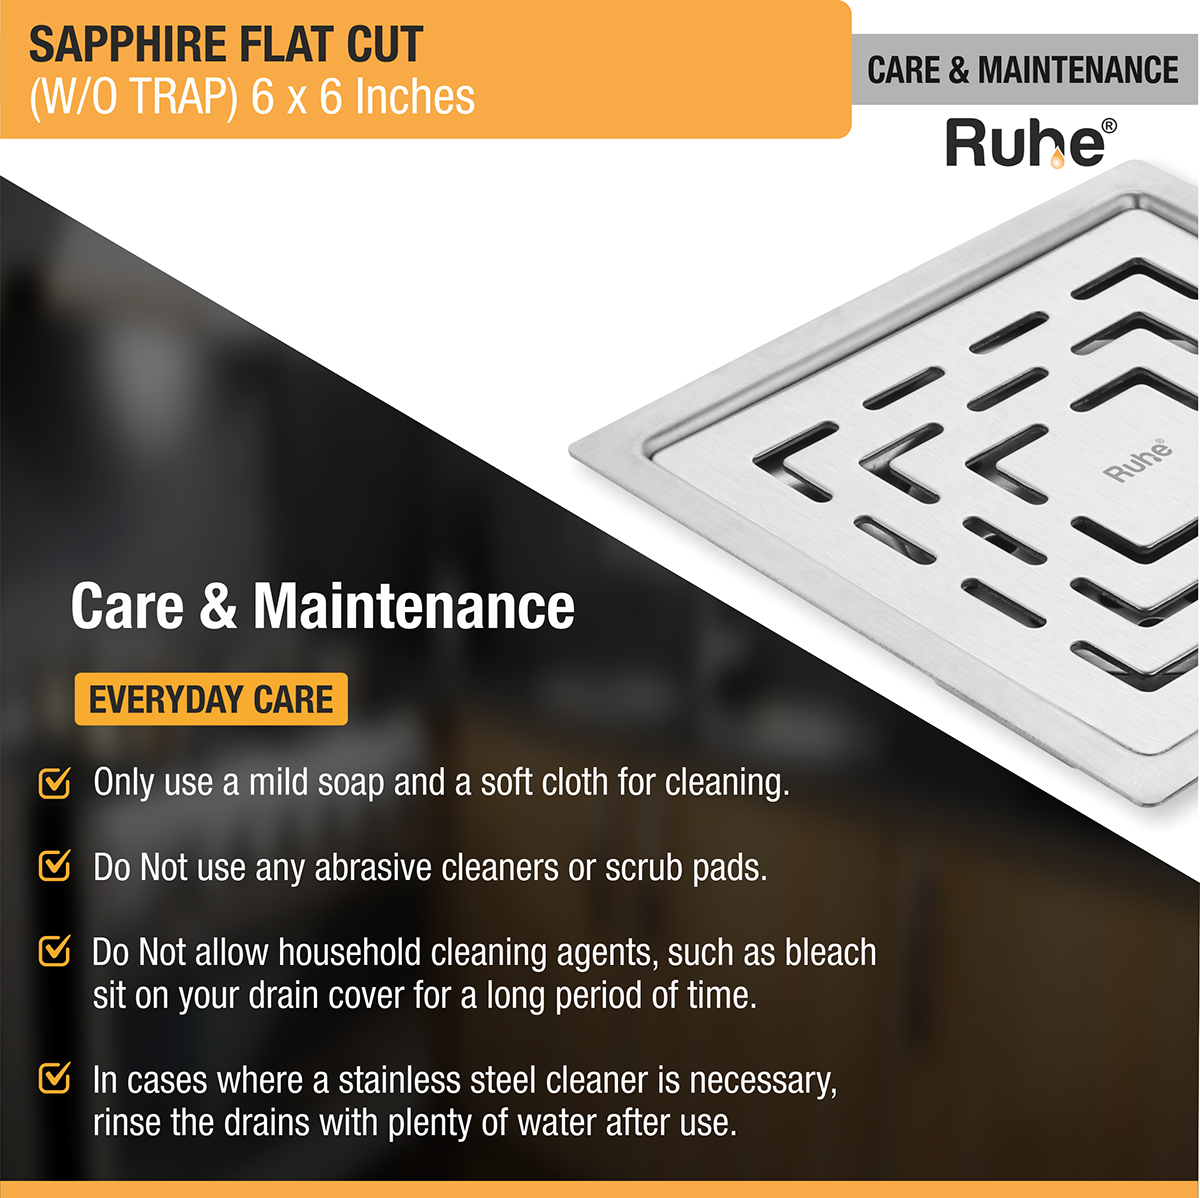 Sapphire Square Flat Cut 304-Grade Floor Drain (6 x 6 Inches) care and maintenance